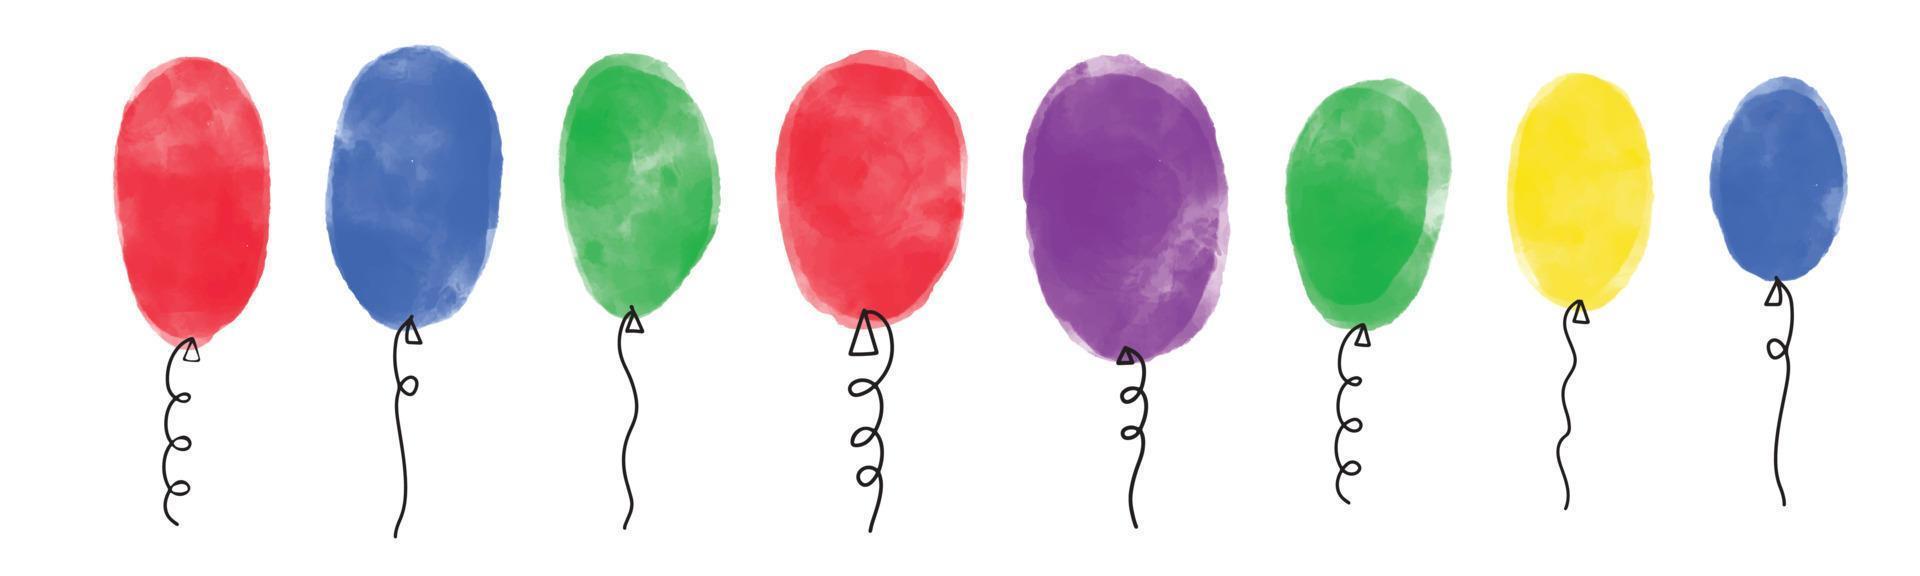 Set of cute vector watercolor textured balloons from watercolour paint stains with black curly string. Clip art collection of artistic creative baloons for holiday design.